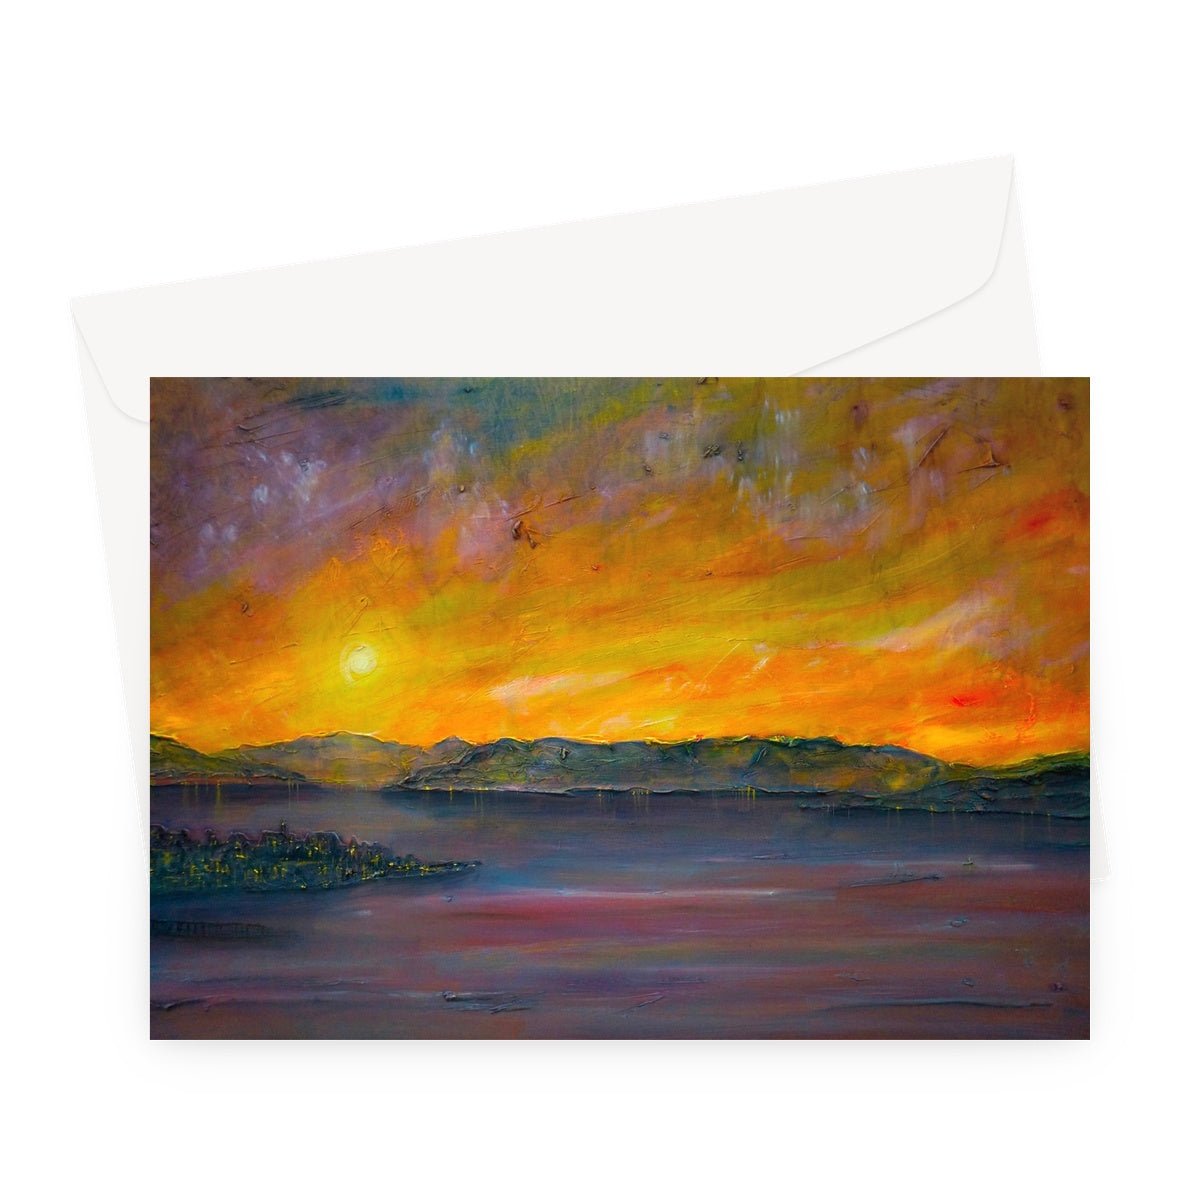 Sunset Over Gourock Art Gifts Greeting Card-Greetings Cards-River Clyde Art Gallery-A5 Landscape-1 Card-Paintings, Prints, Homeware, Art Gifts From Scotland By Scottish Artist Kevin Hunter